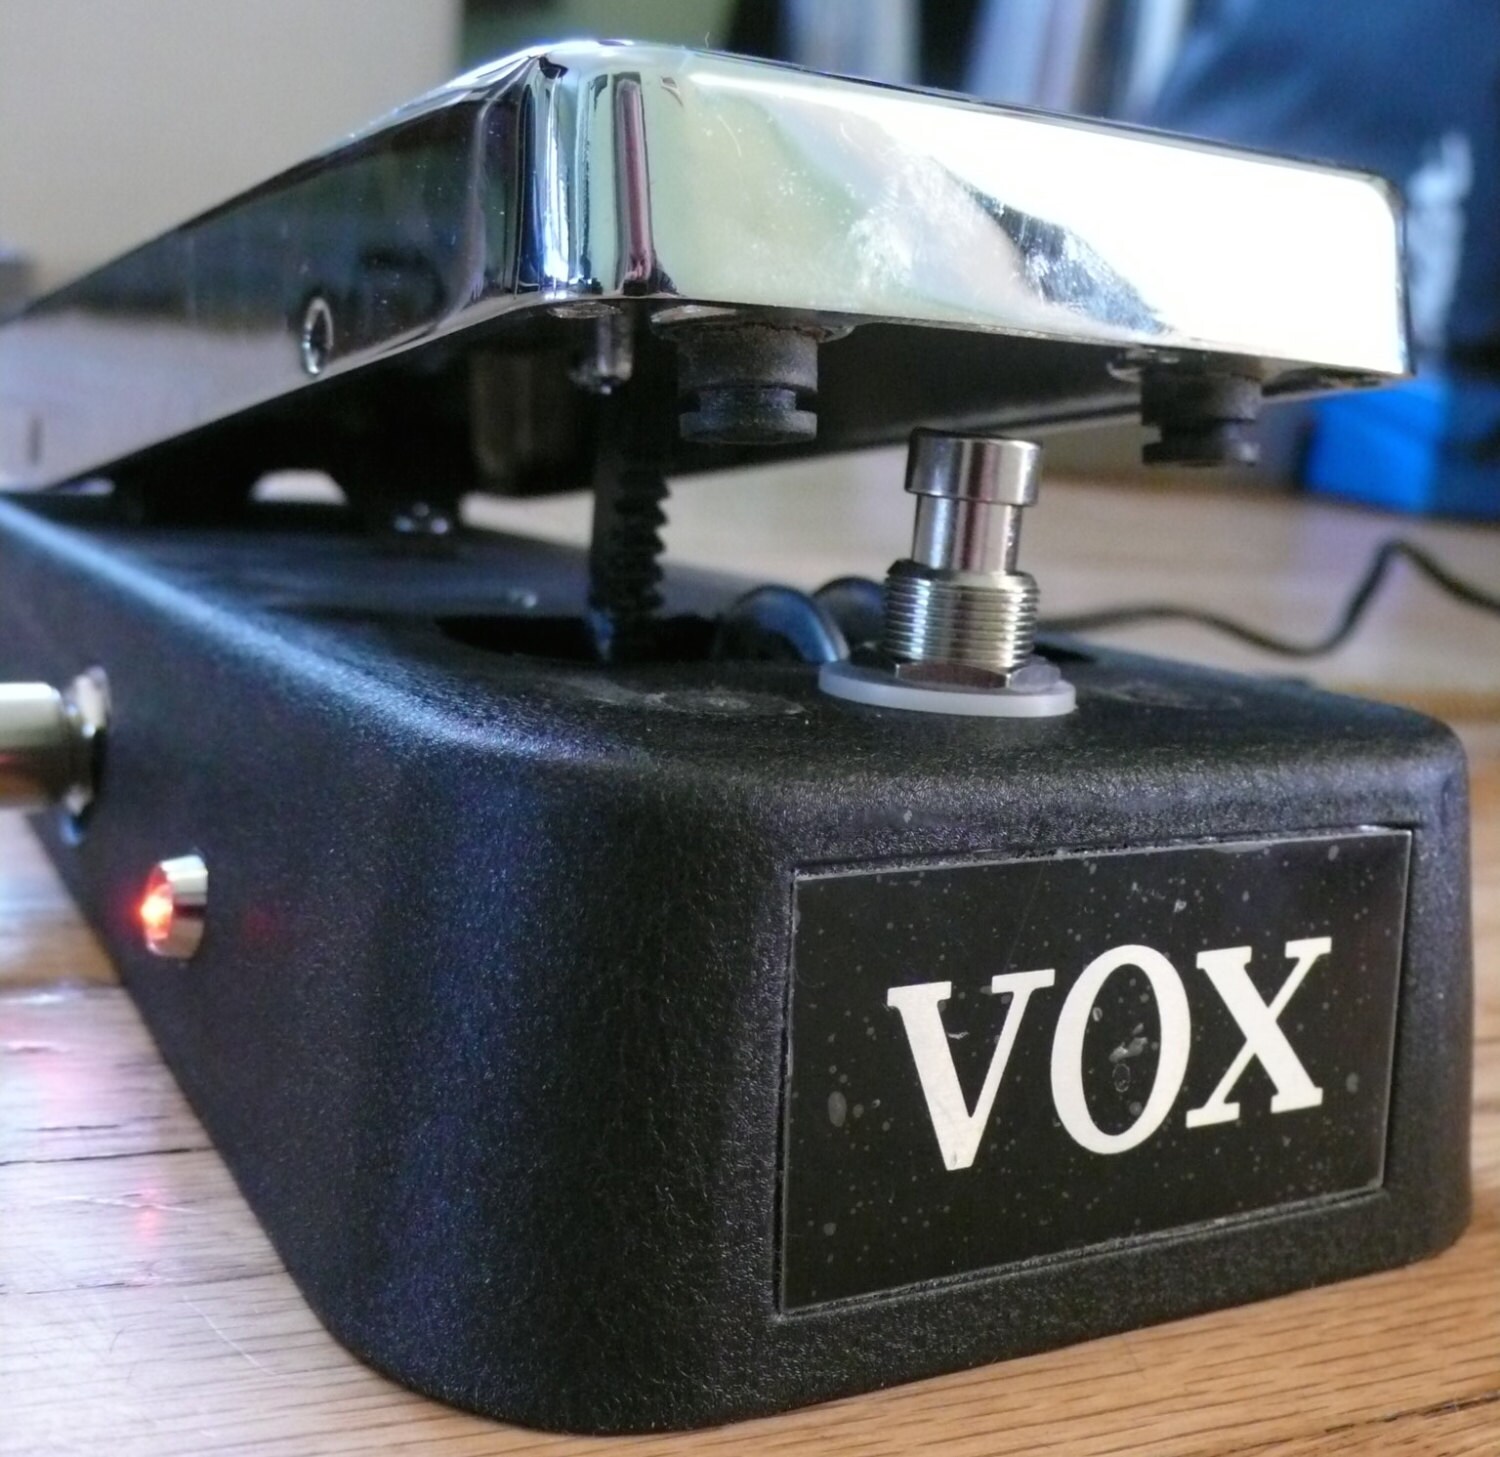 Modify Your Vox V847 Wah Guitar Effects Pedal With Upgrades - Etsy